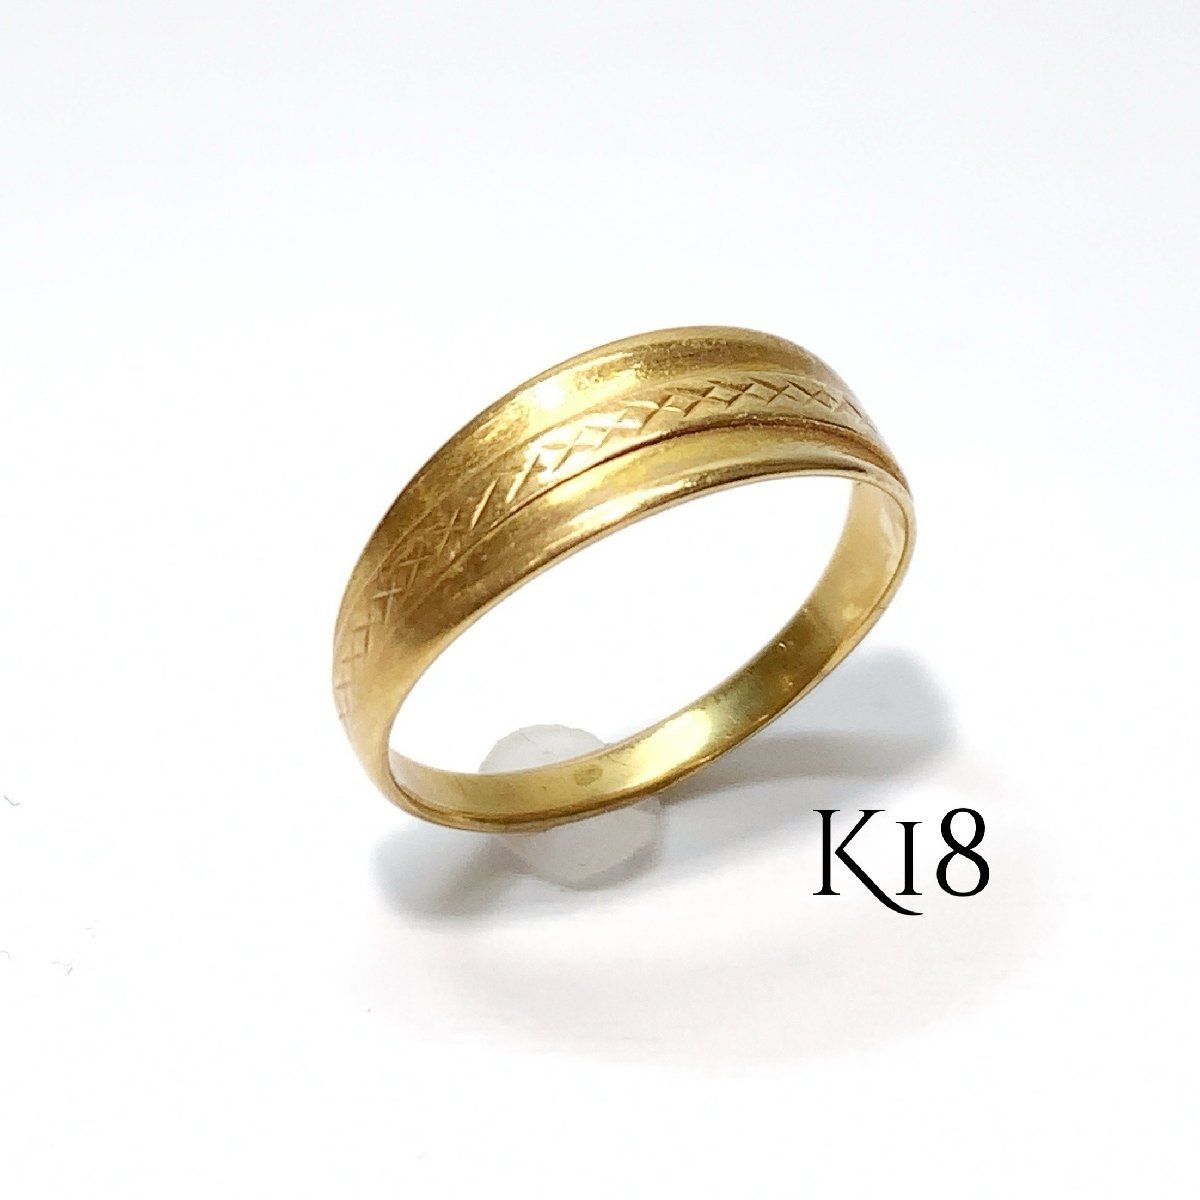 K18 ring approximately 17 number approximately 2.7g ring GOLD Gold 18 gold 750 18K precious metal stamp men's lady's accessory jewelry simple 